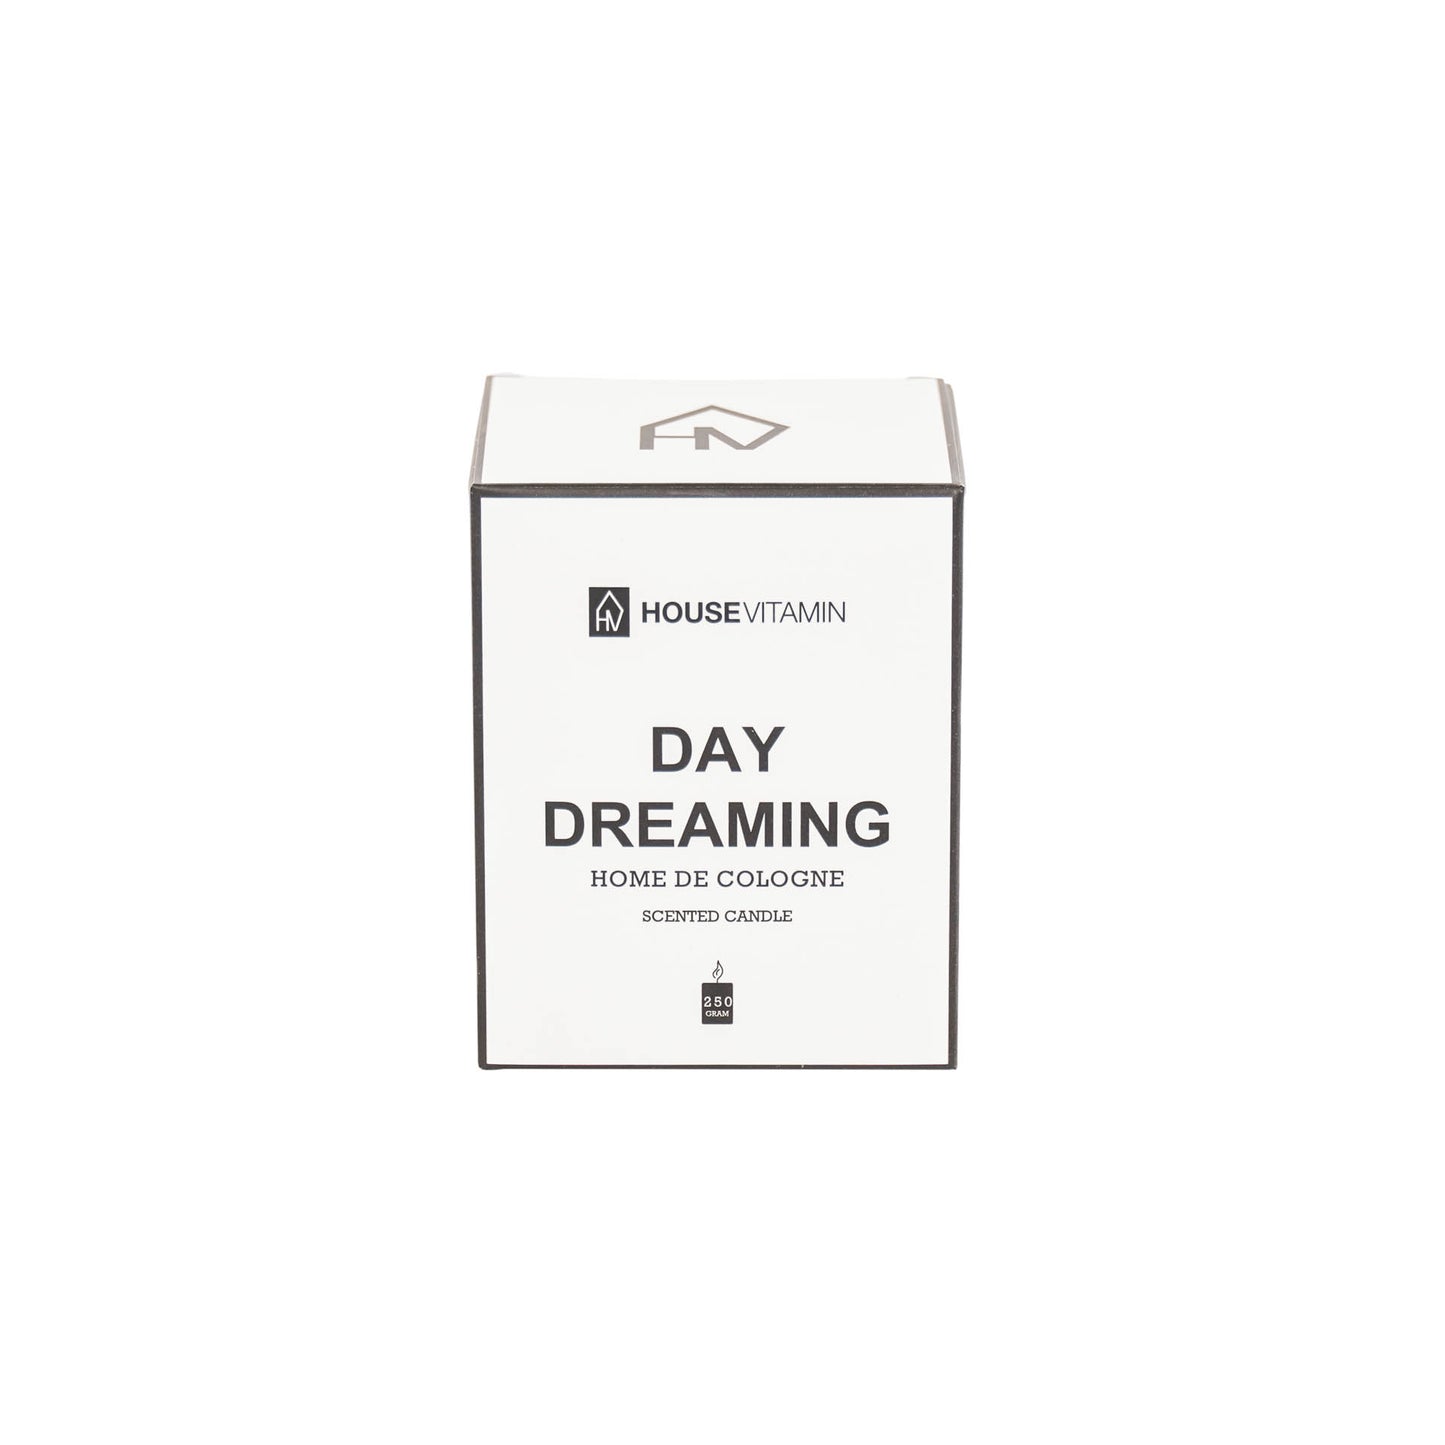 Scented Candle - Perfumed Wax - 250gr - Day Dreaming